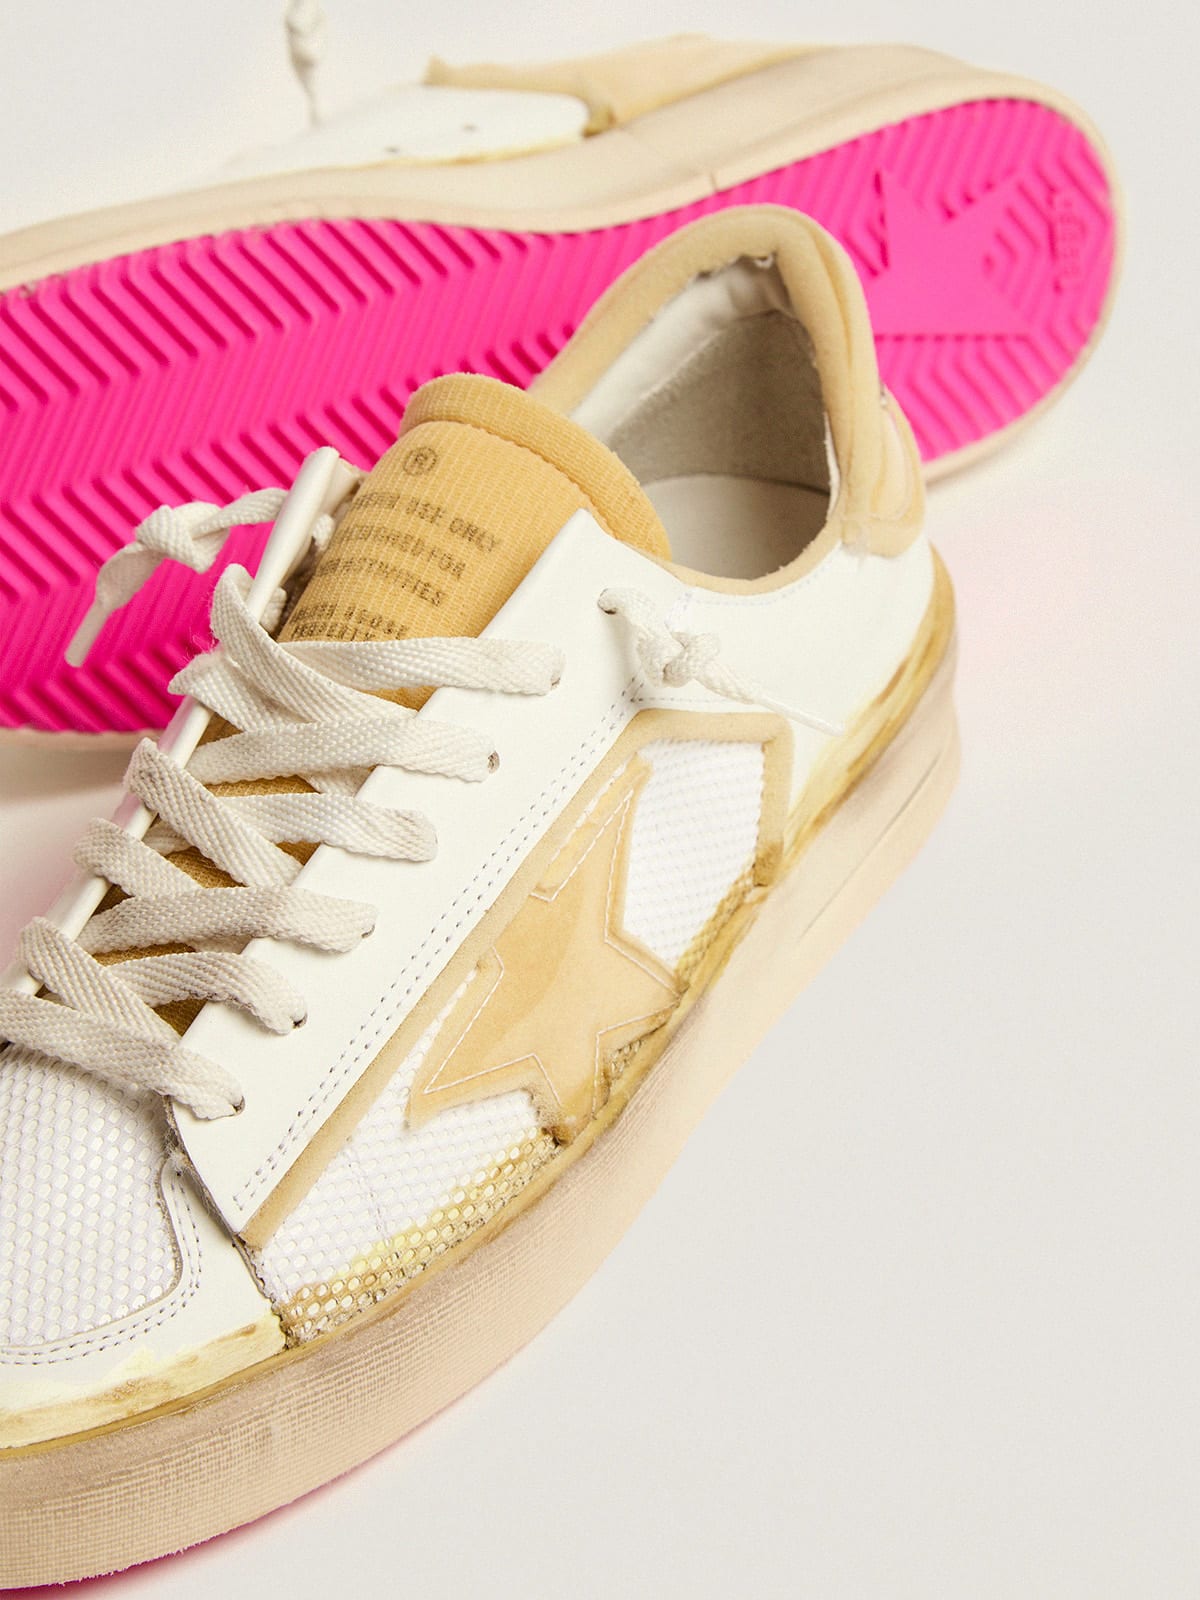 Golden Goose - Men’s Stardan LAB sneakers in white leather with foam and PVC inserts in 